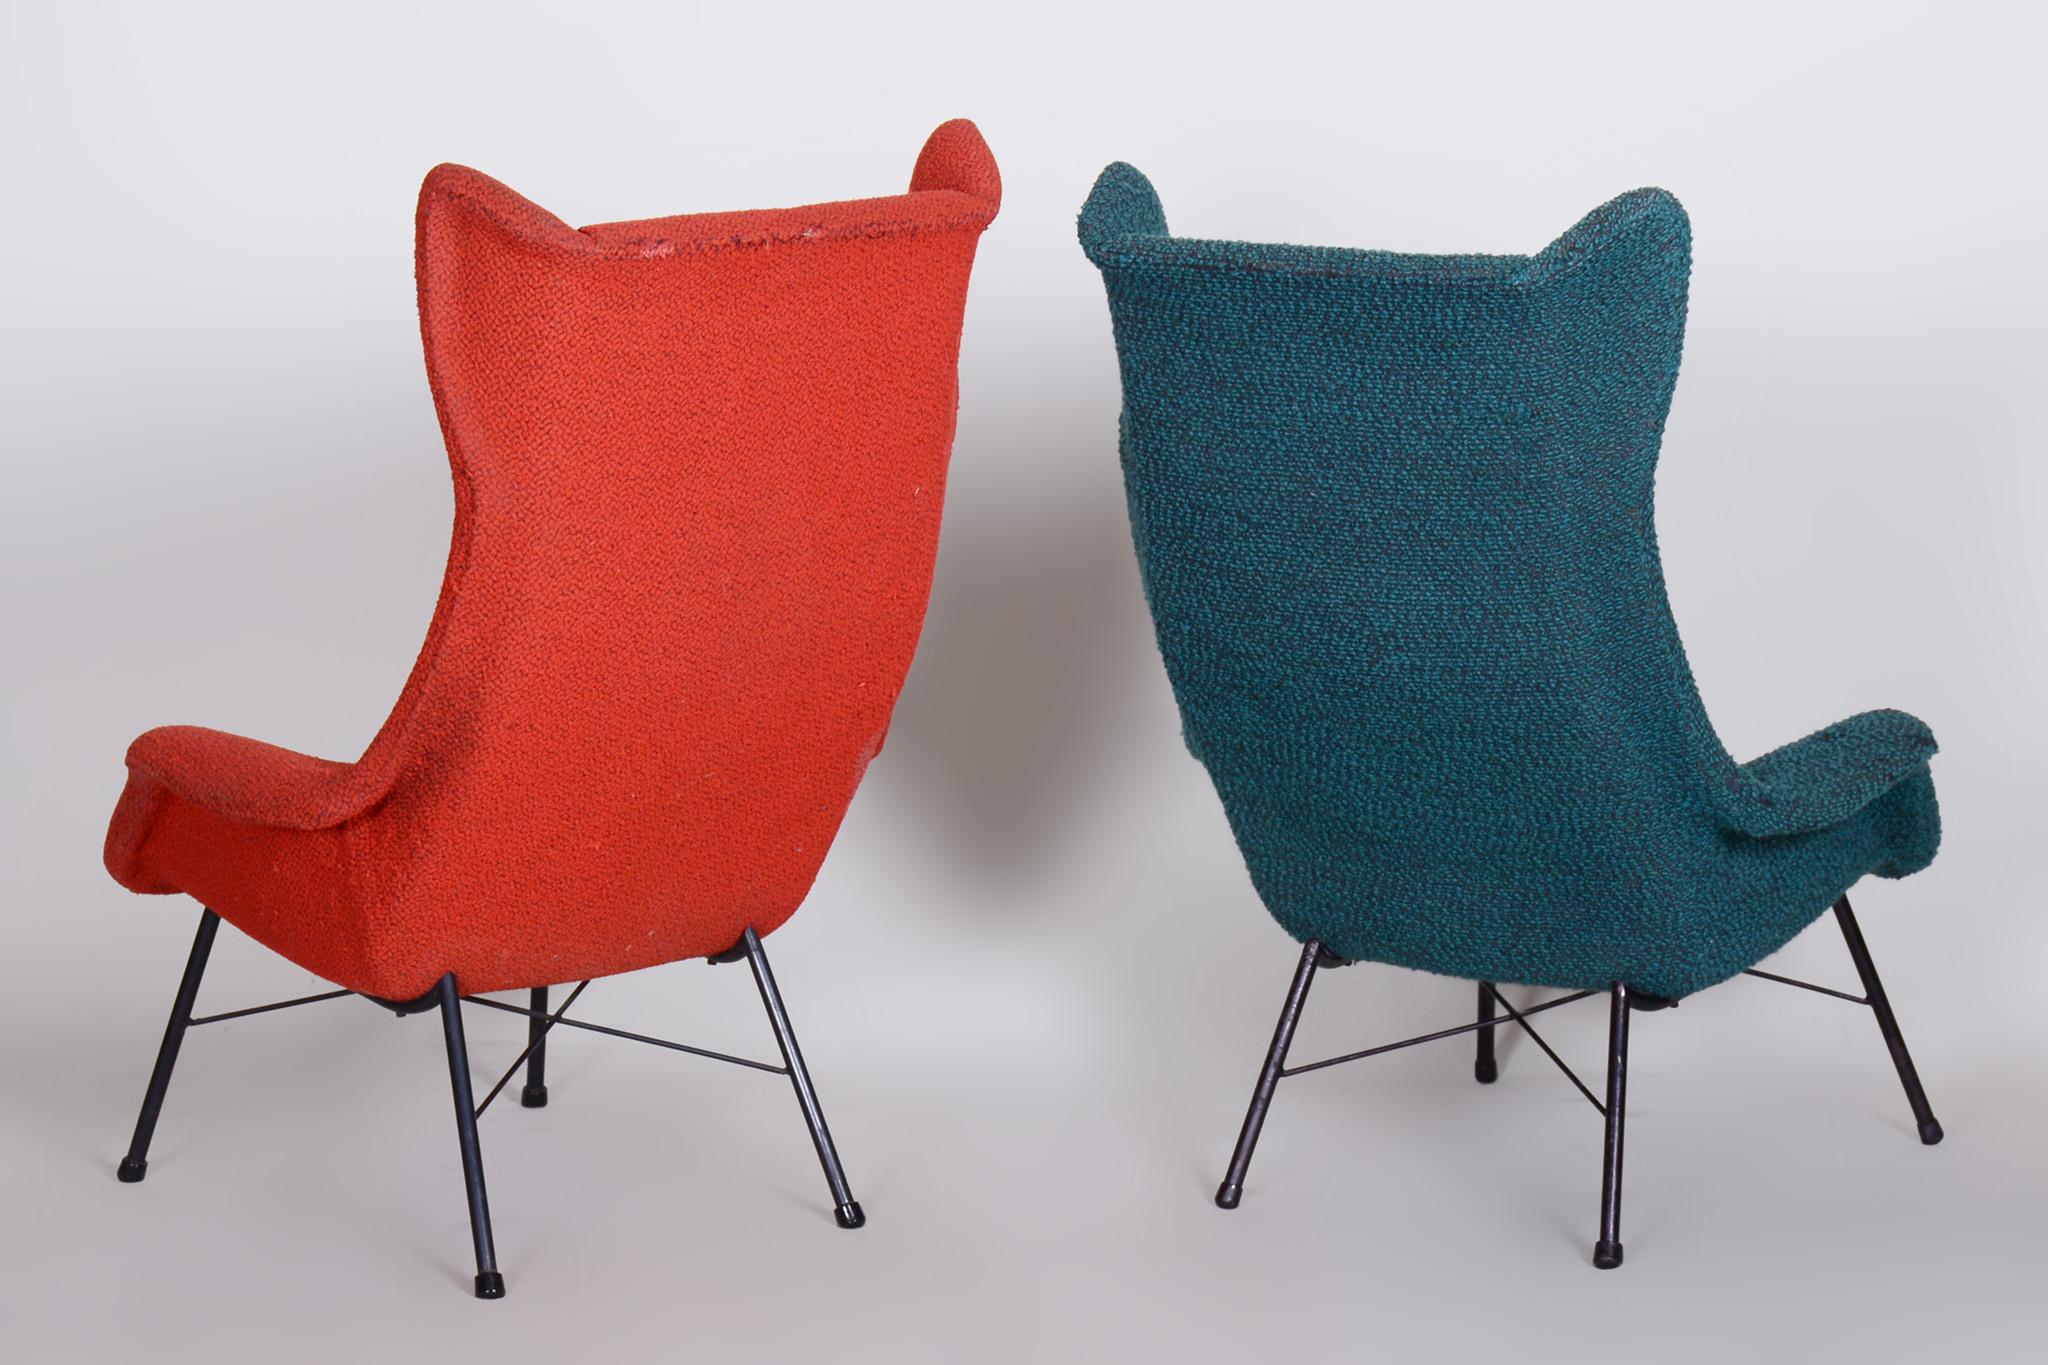 Mid-Century Modern Pair of Mid Century Armchairs by Miroslav Navratil, Red and Blue, 1950s, Czechia